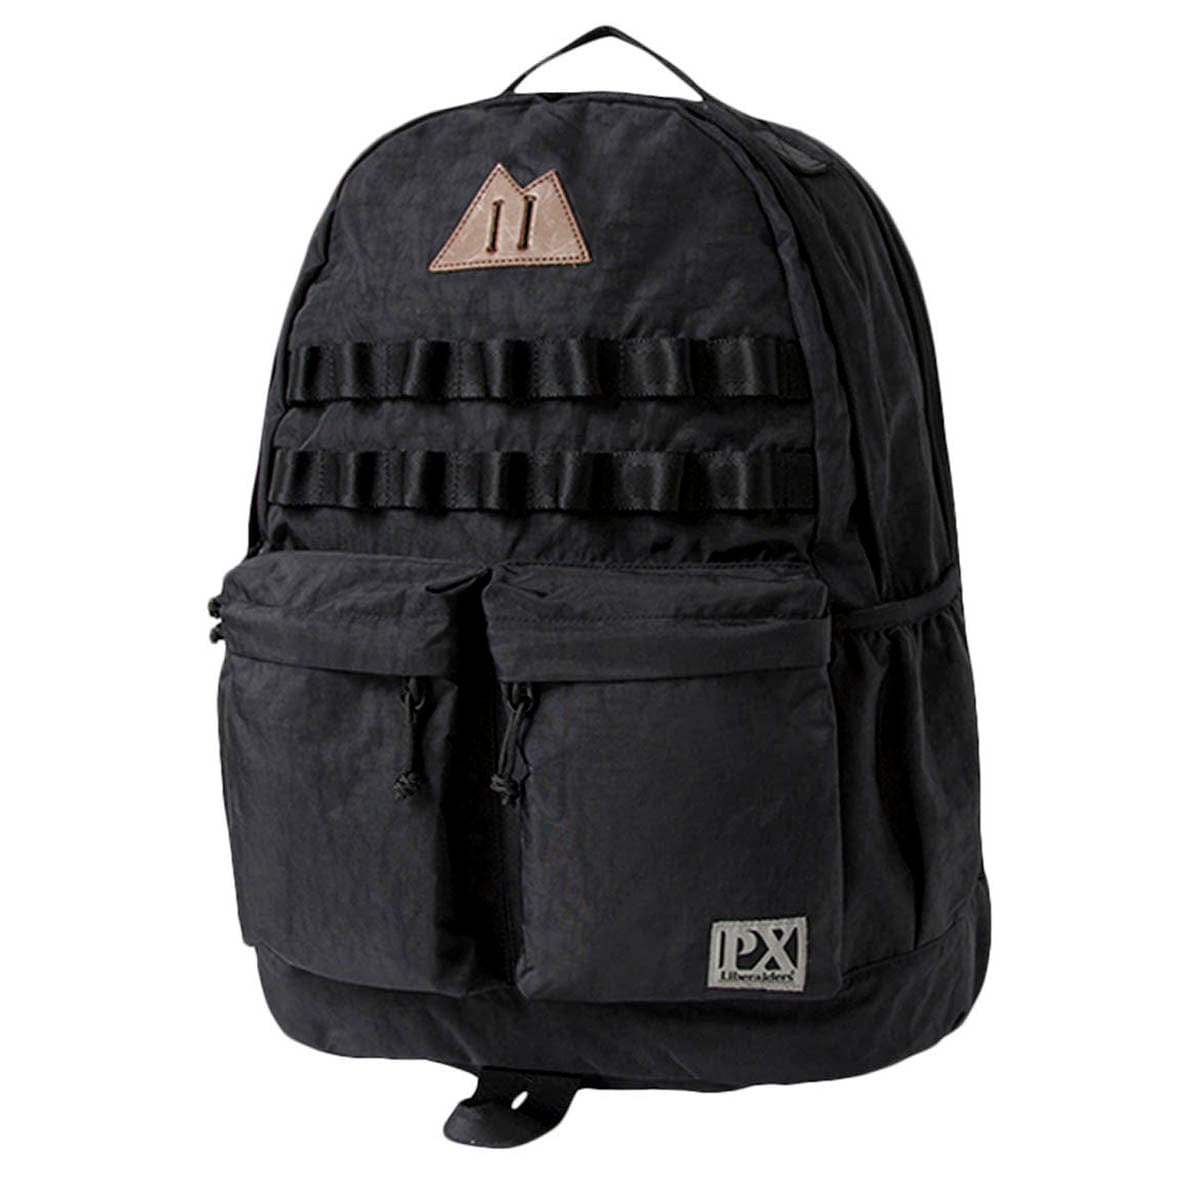 Liberaiders Bags BLACK / O/S PX VOYAGE BACKPACK